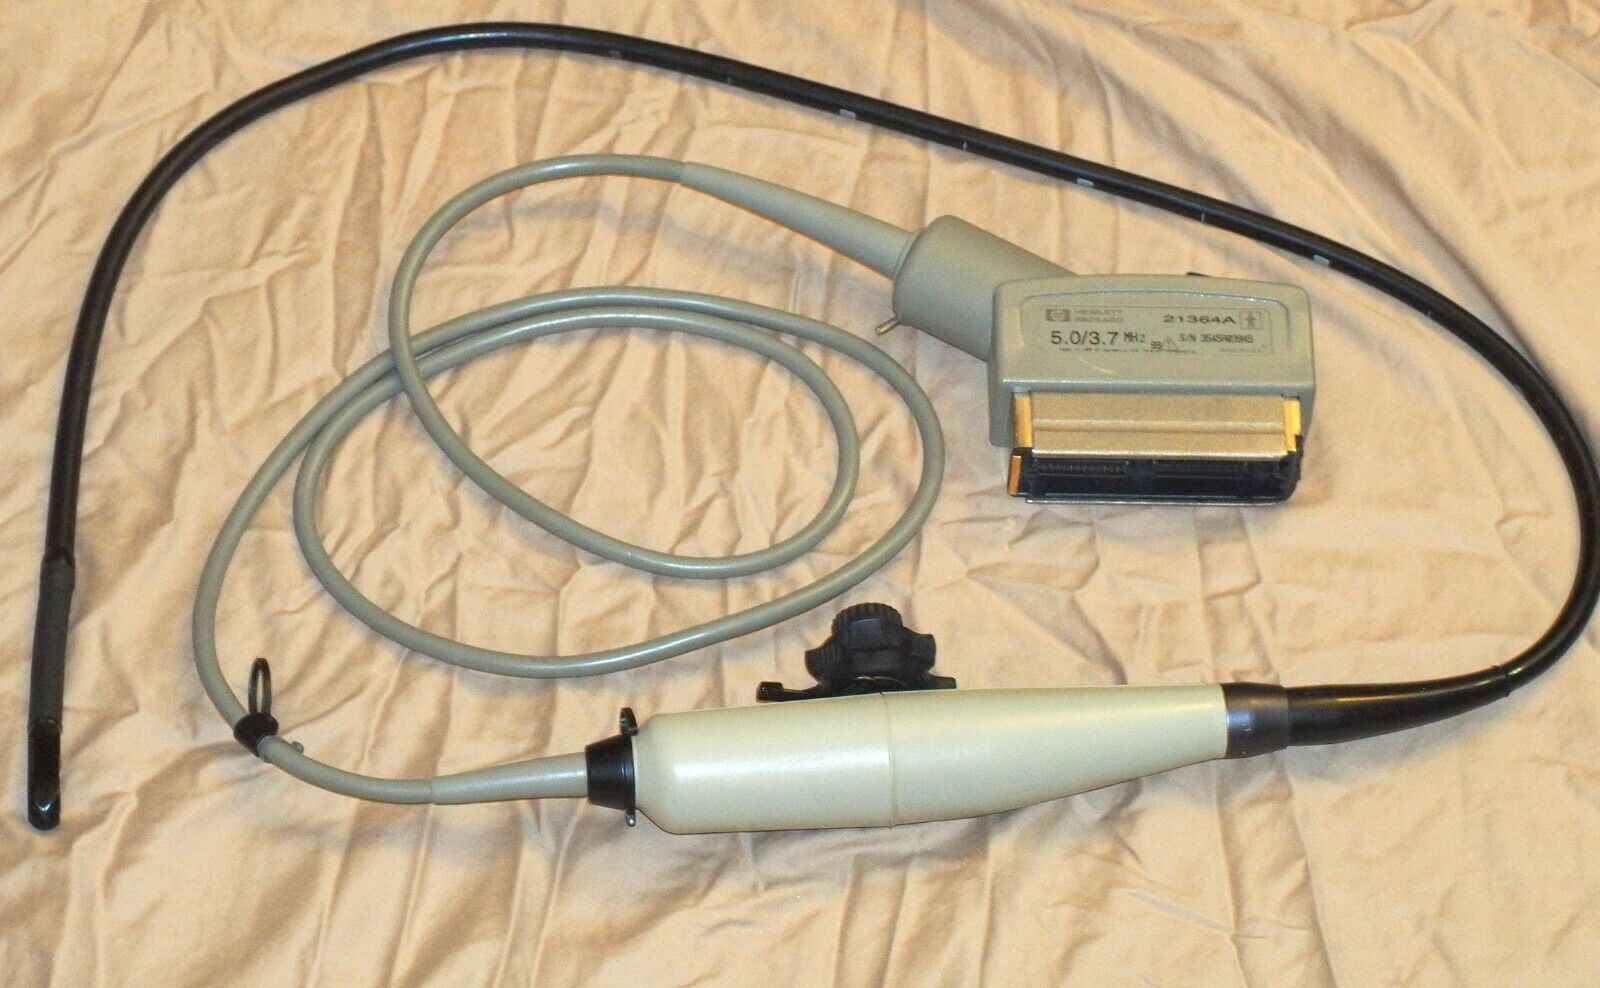 HP #21364A Transesophageal Ultrasound Transducer Probe 5.0/3.7MHz USA DIAGNOSTIC ULTRASOUND MACHINES FOR SALE